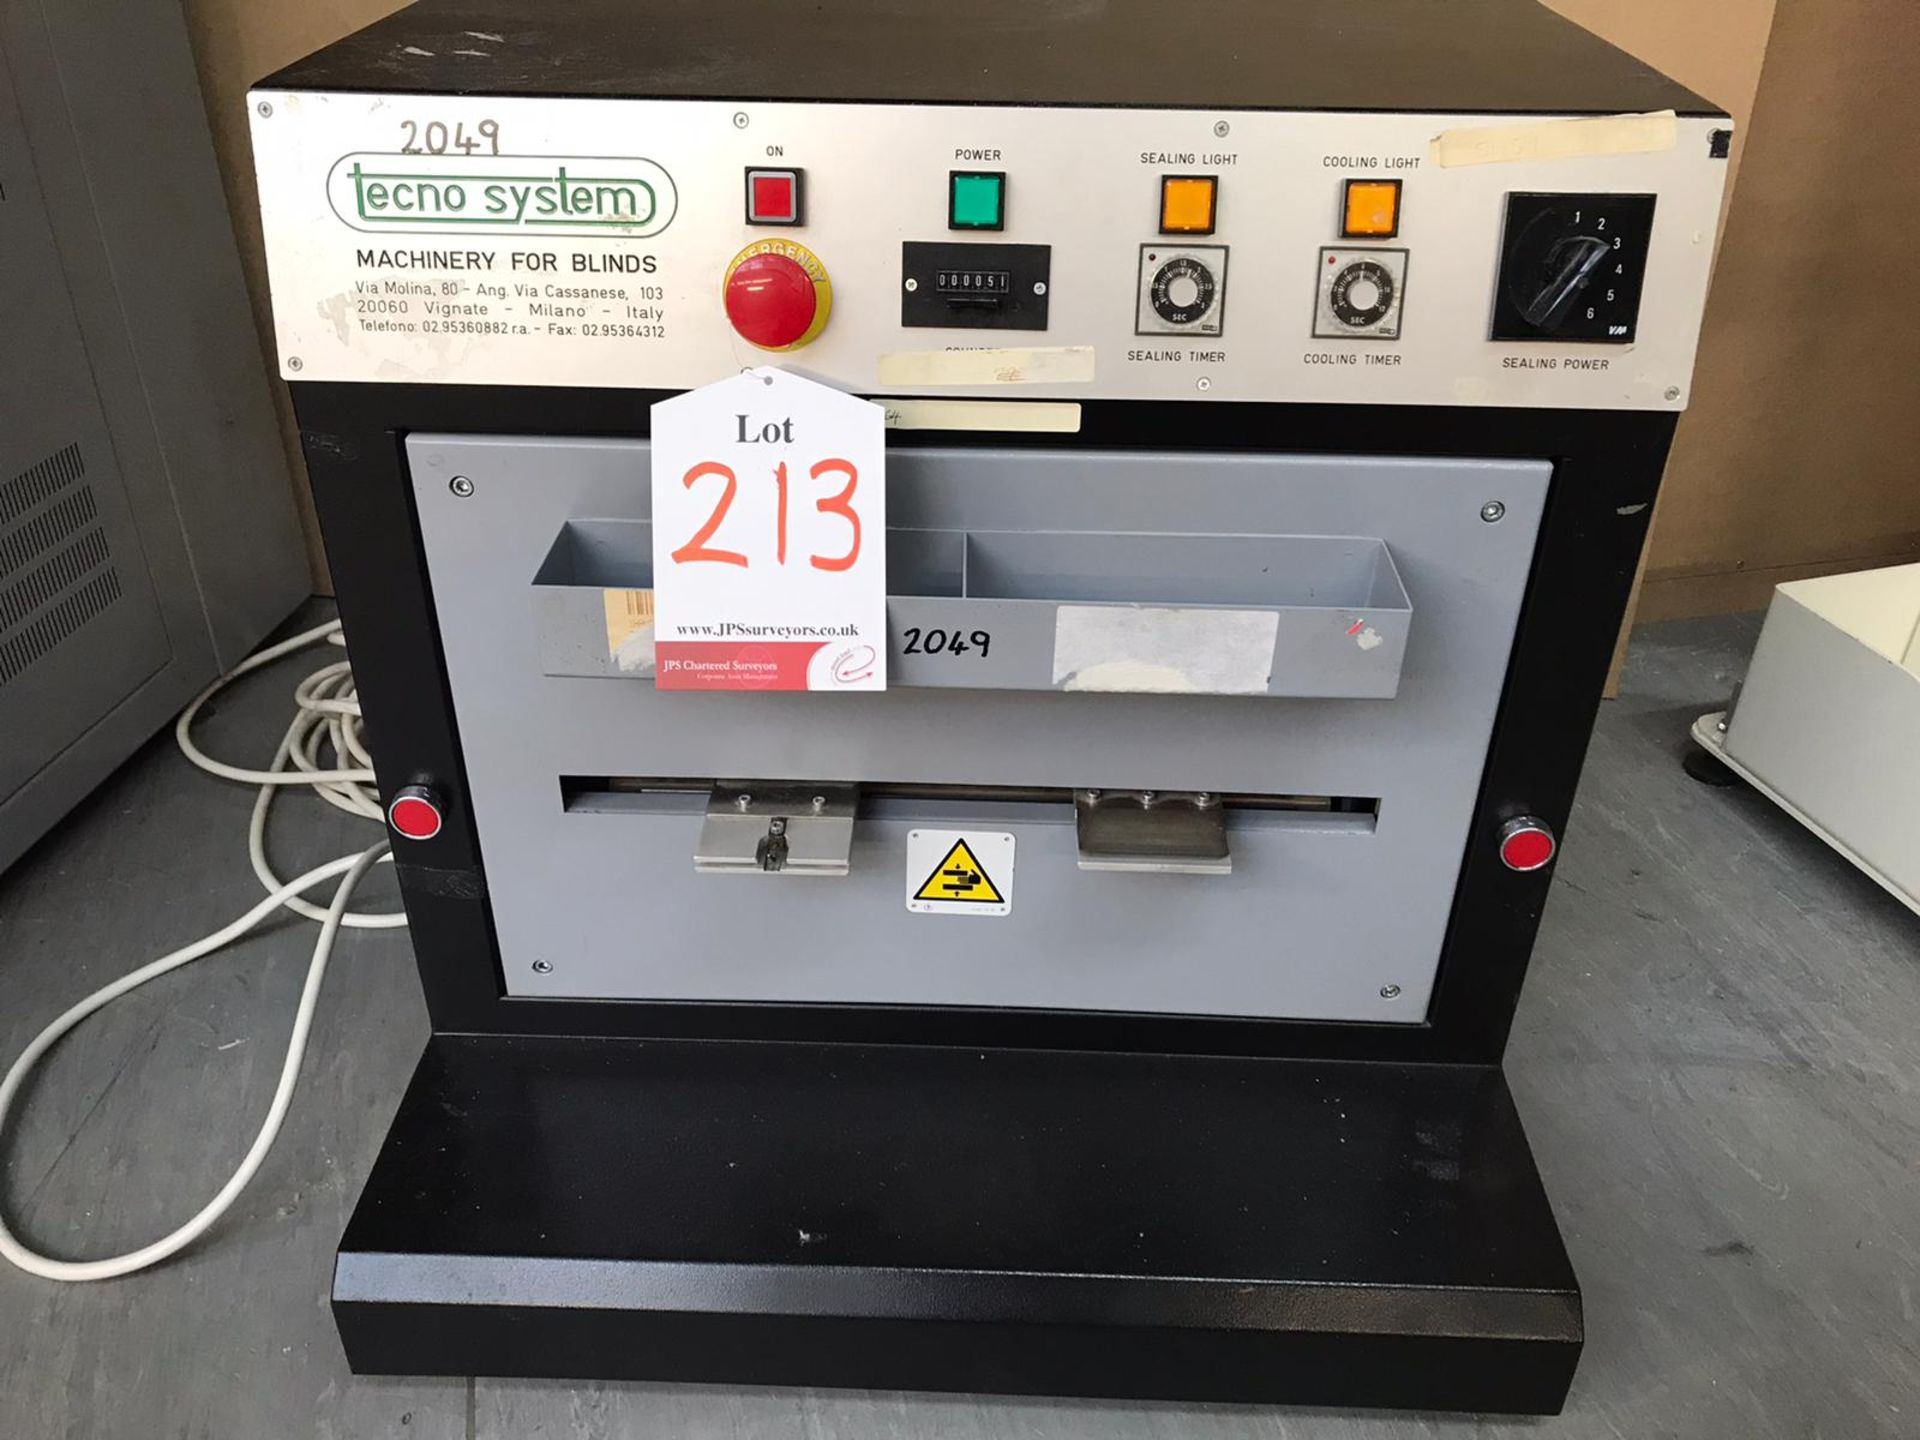 Techno system TS050 Compact Blind Sealing Machine